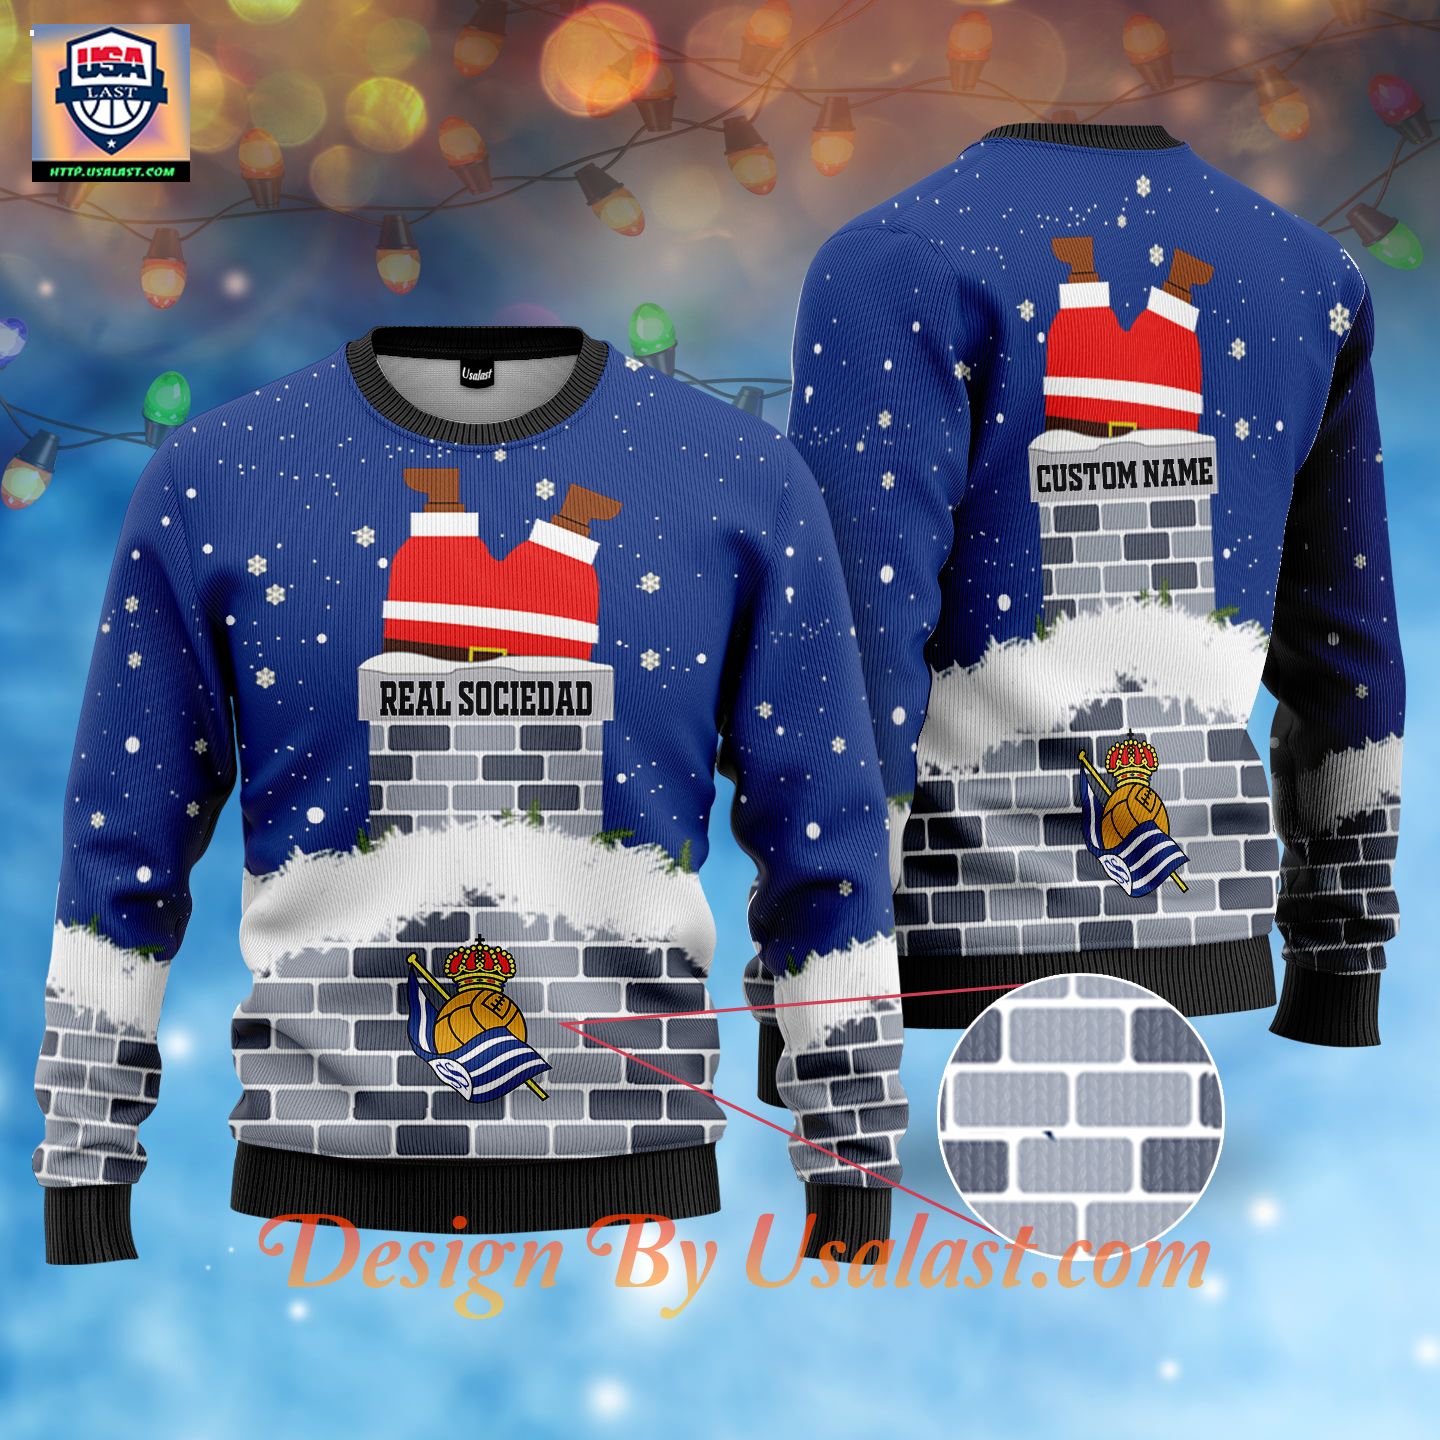 Real Sociedad Santa Claus Custom Name Ugly Christmas Sweater - Rocking picture